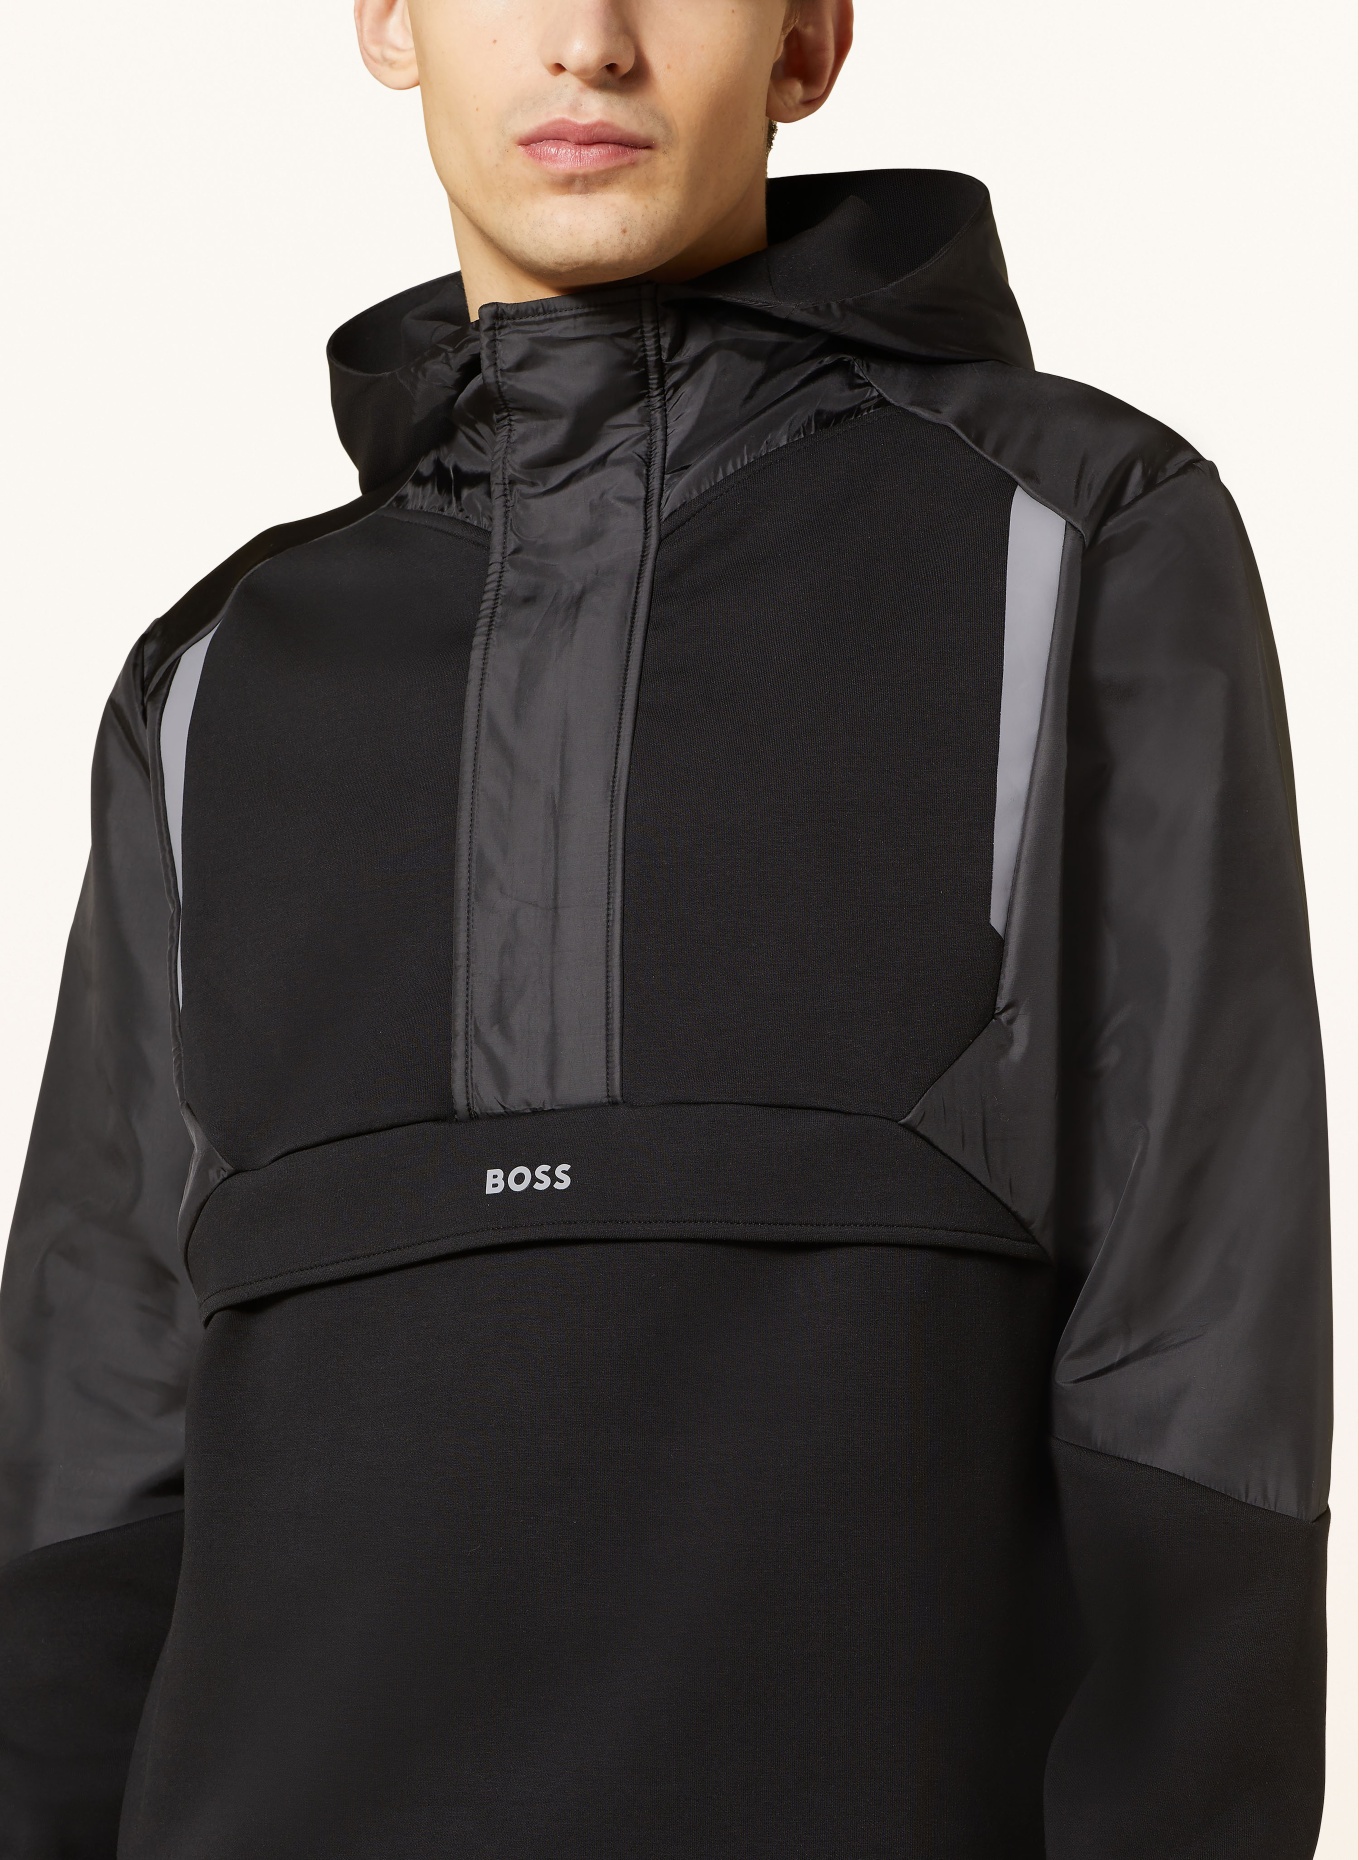 BOSS Anorak jacket SANNON in mixed materials, Color: BLACK (Image 4)